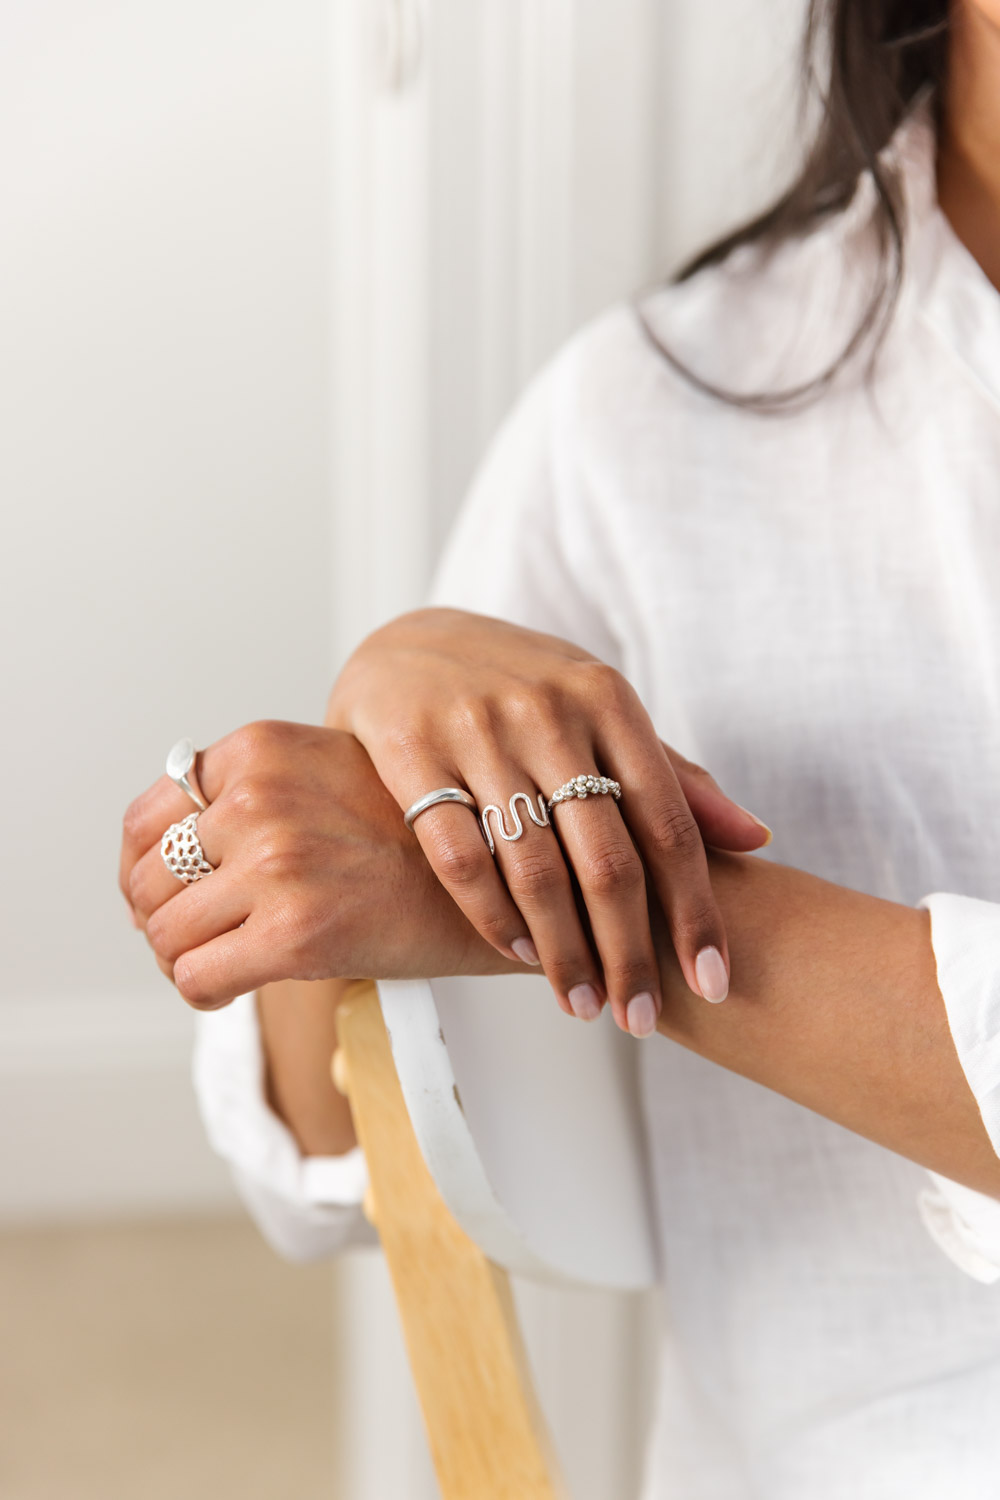 Woman wears a range of sterling silver rings, resting her hands over the back of a white chair, wearing a white linen shirt